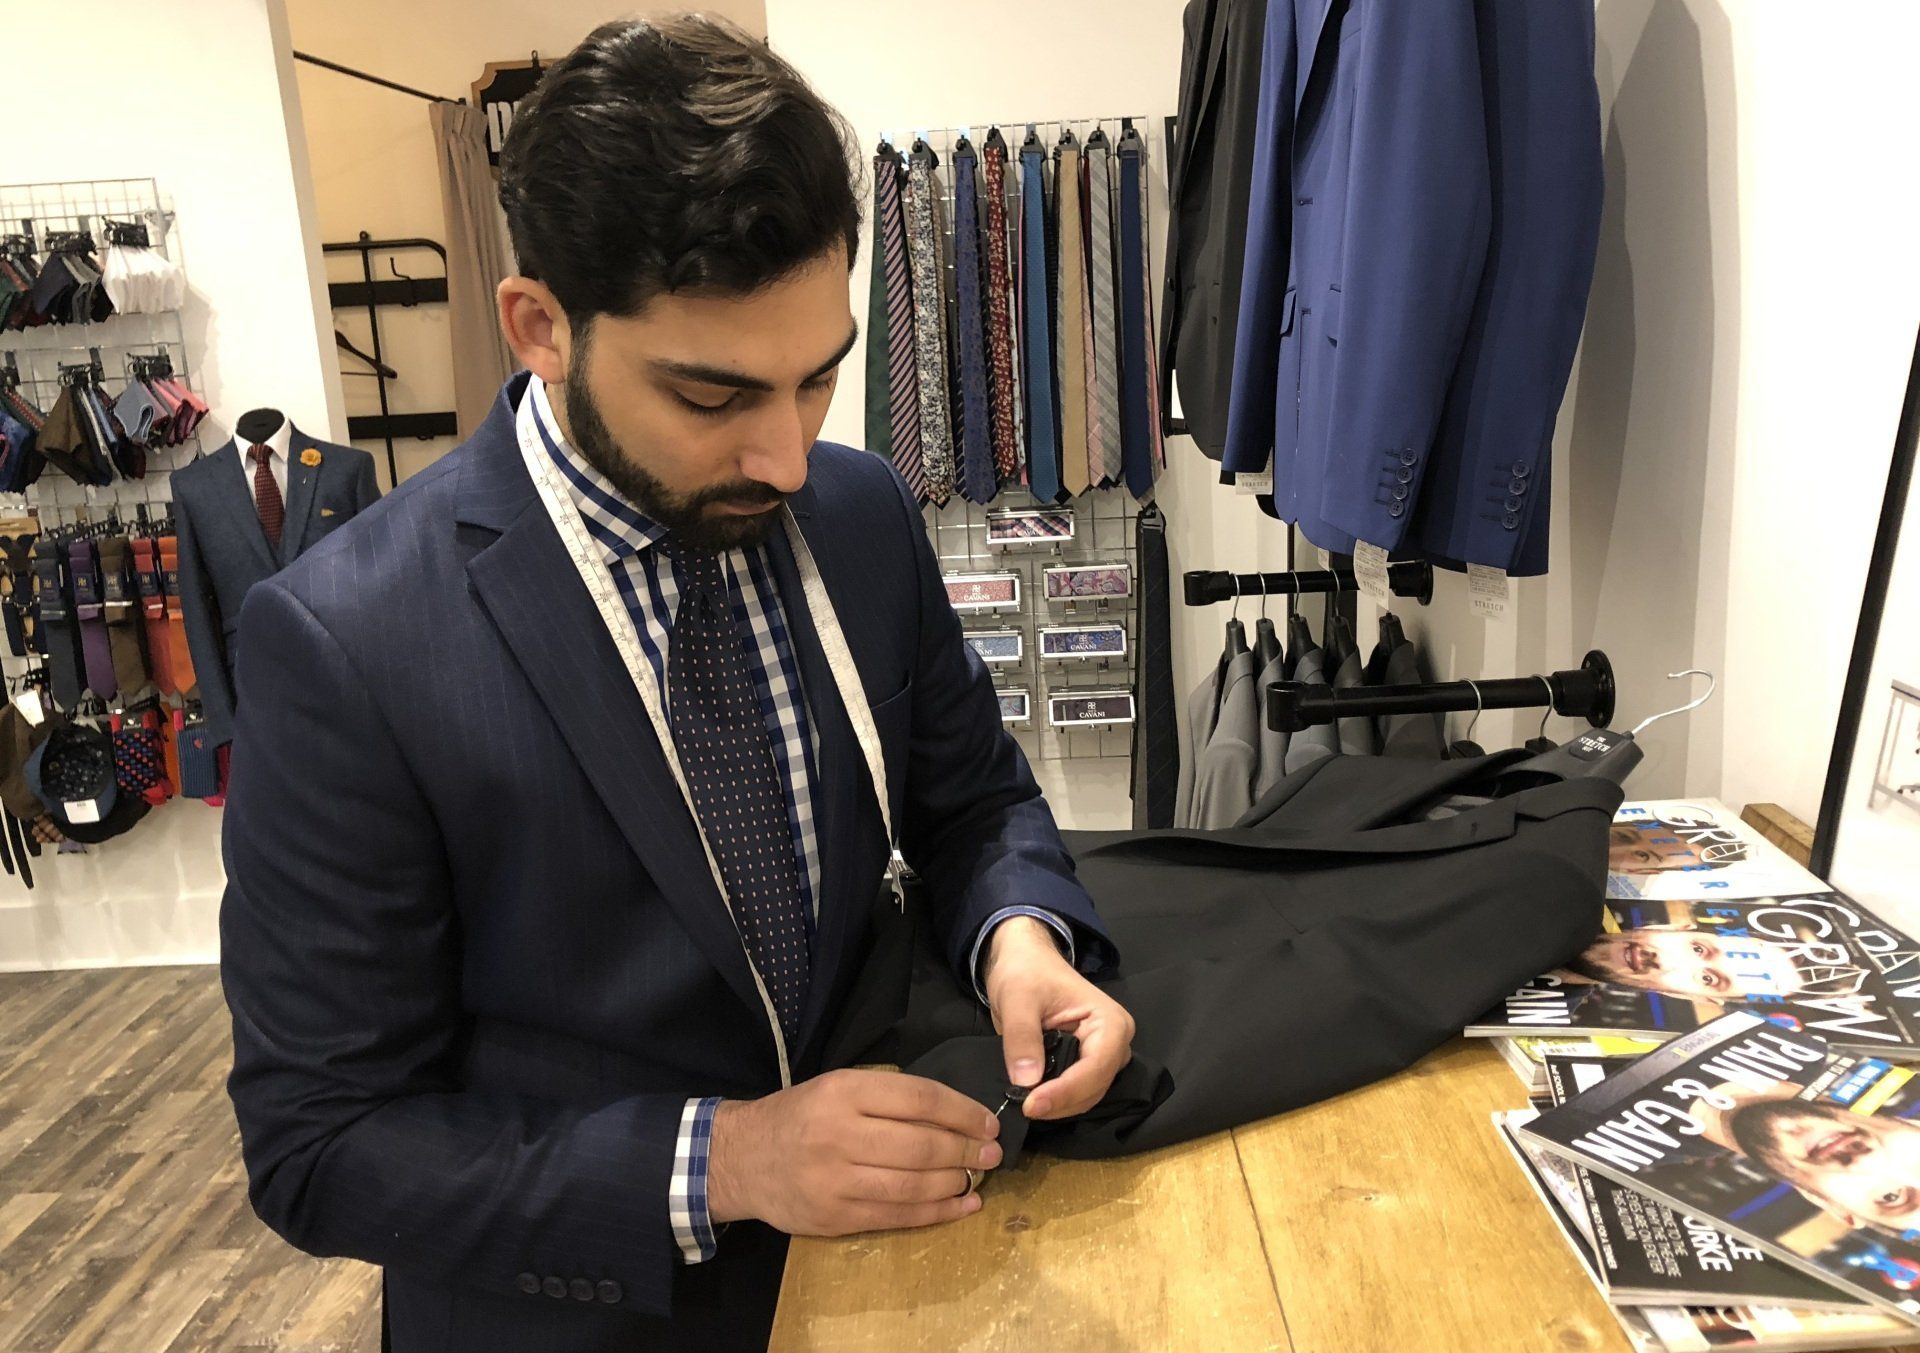 How To Care For Your Suit